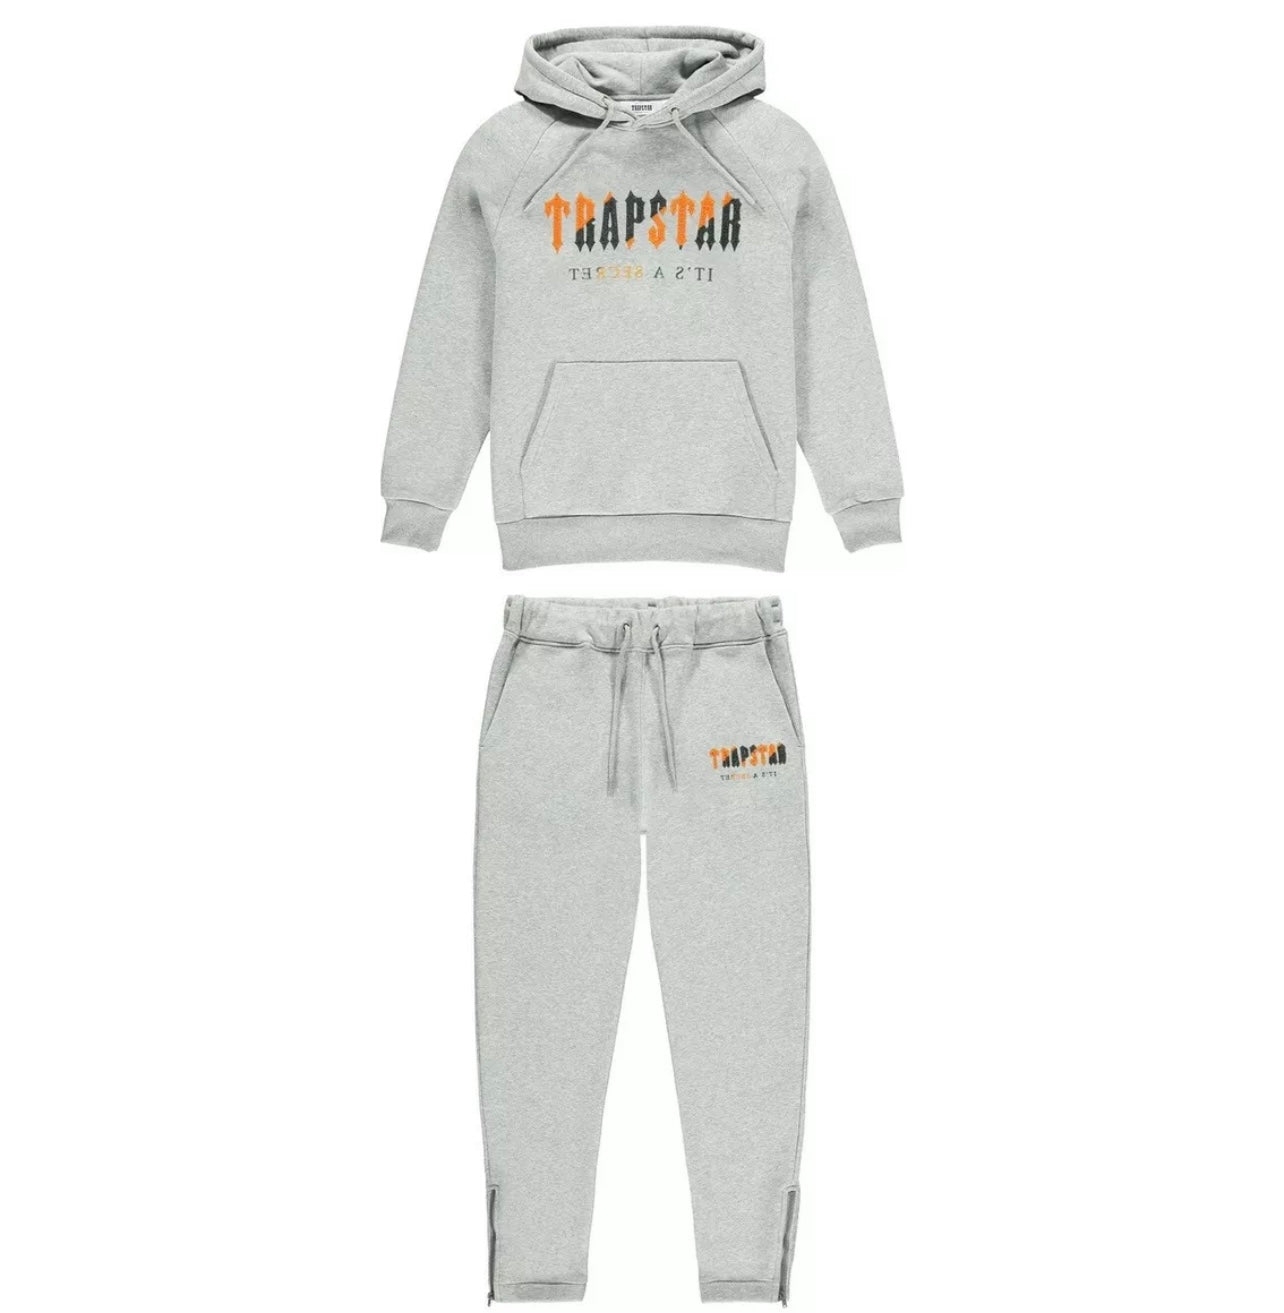 Trapstar Chenille Decoded Hoodie Tracksuit Grey / Orange L – RpshoppingHQ